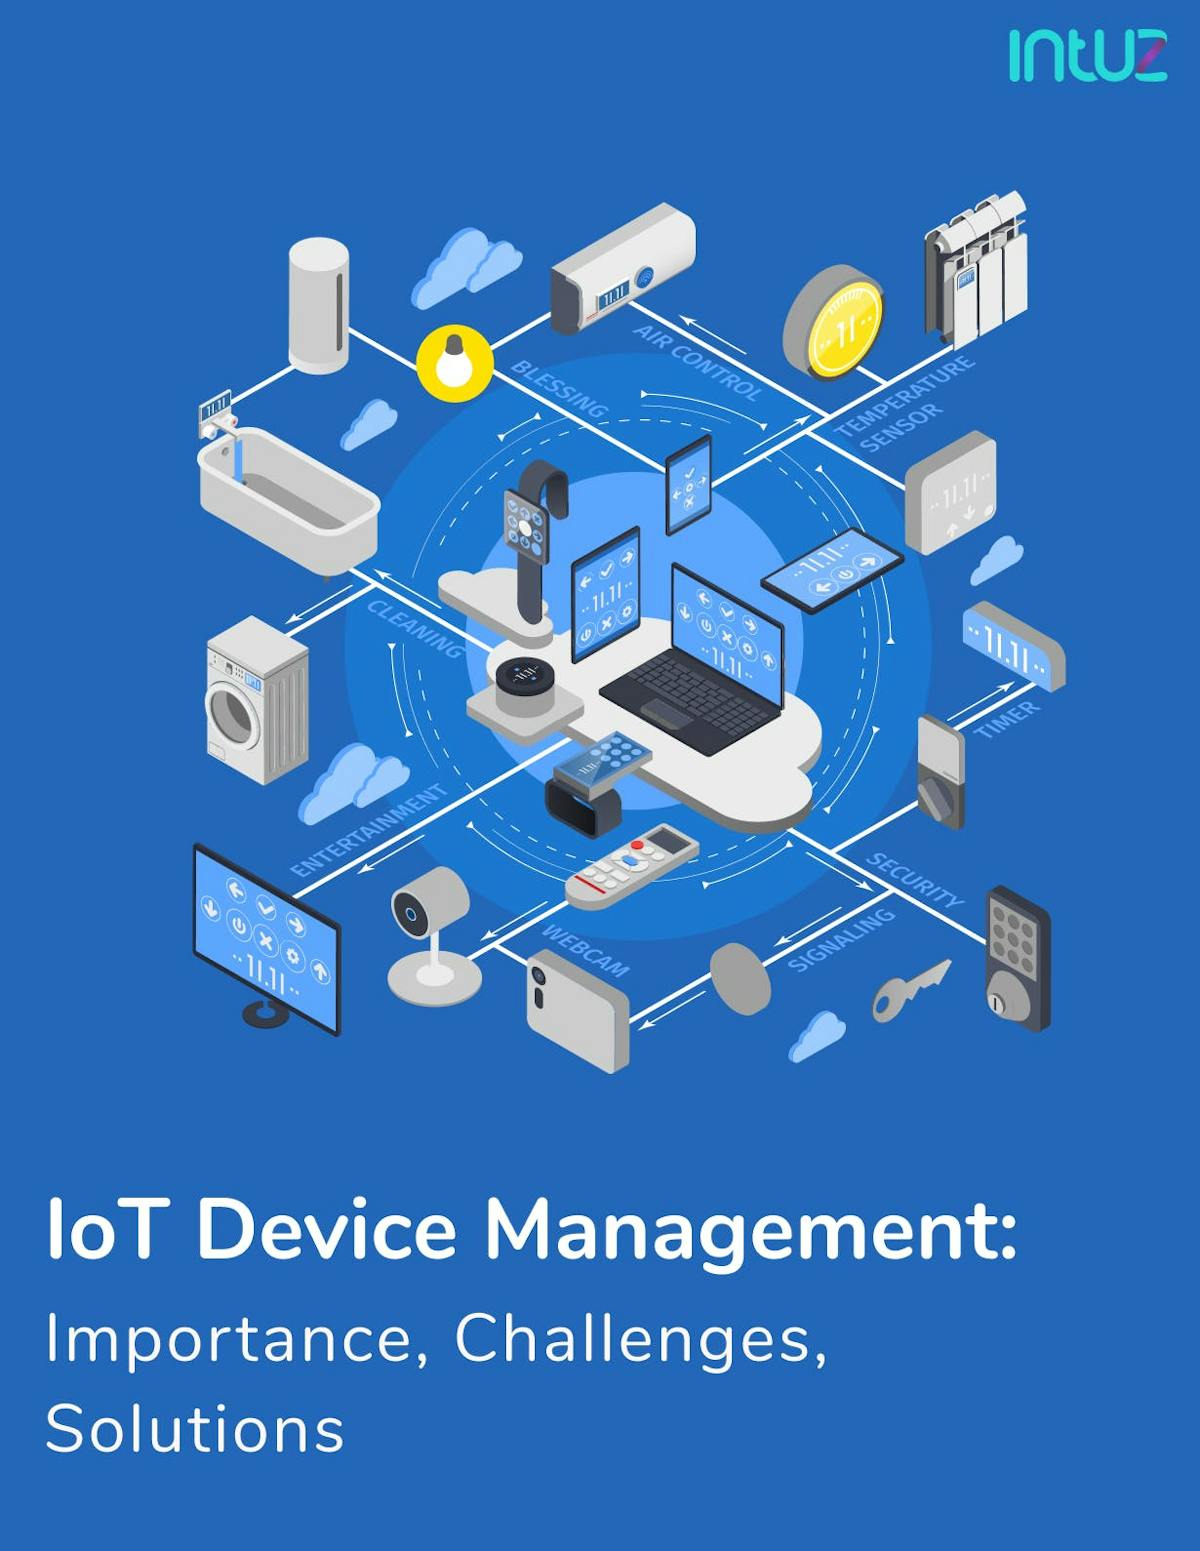 IoT Solutions for Connectivity, Fleet Management, Tracking, and EV